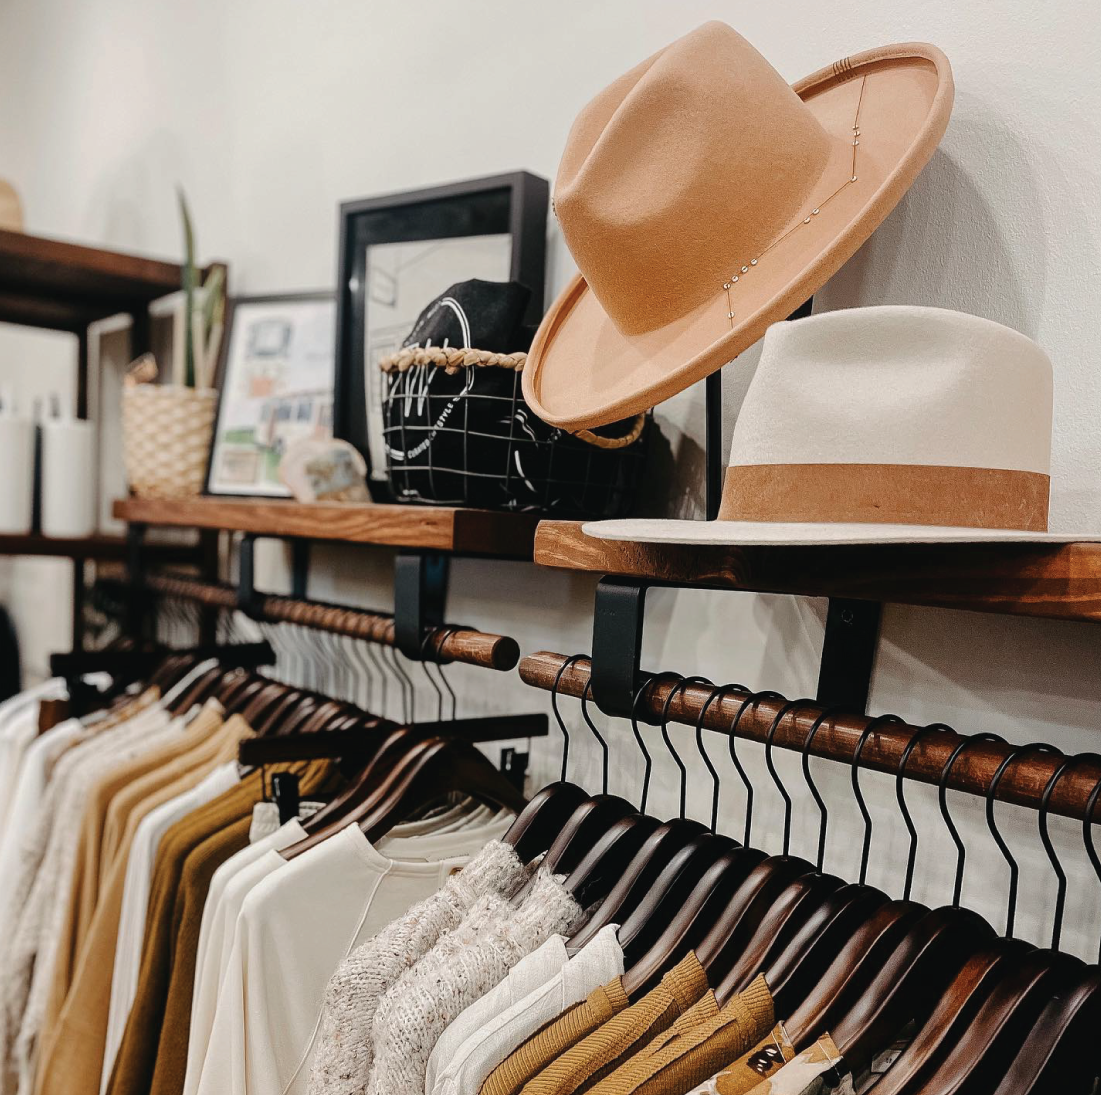 Narrative and Co is an intentionally curated shop of everyday apparel, accessories and goods to elevate your lifestyle.